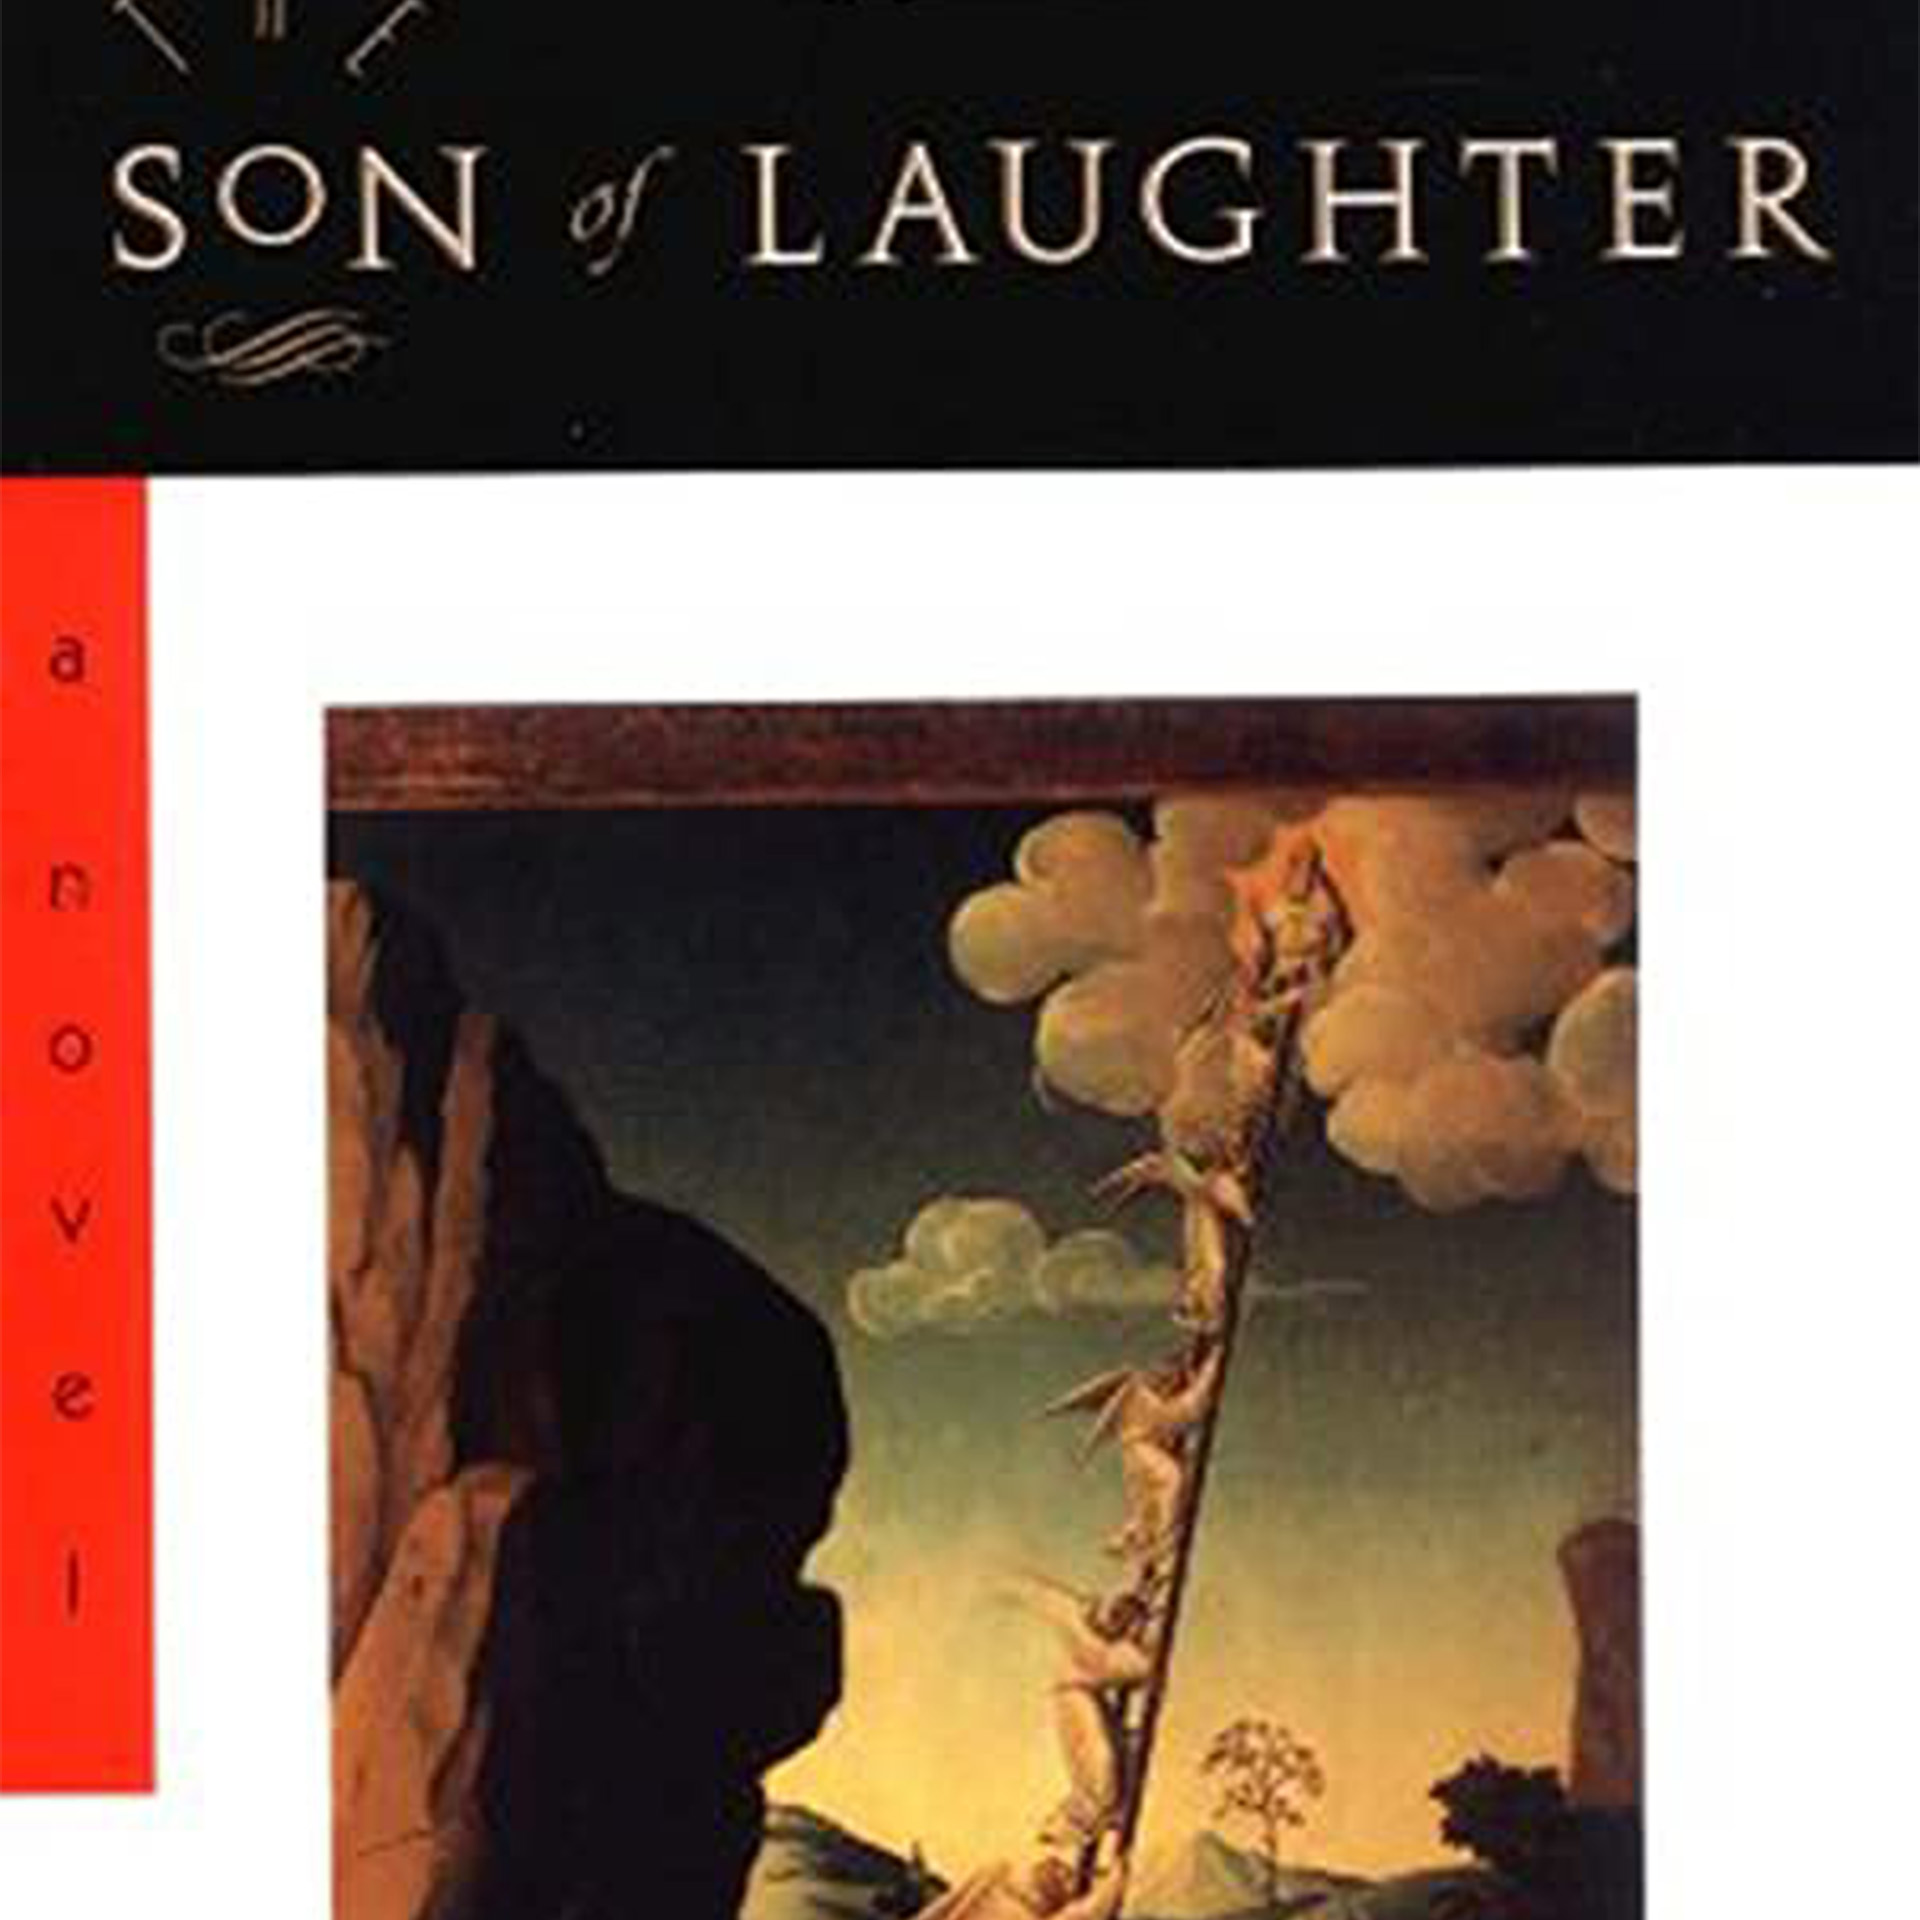 The Son of Laughter by Frederick Buechner